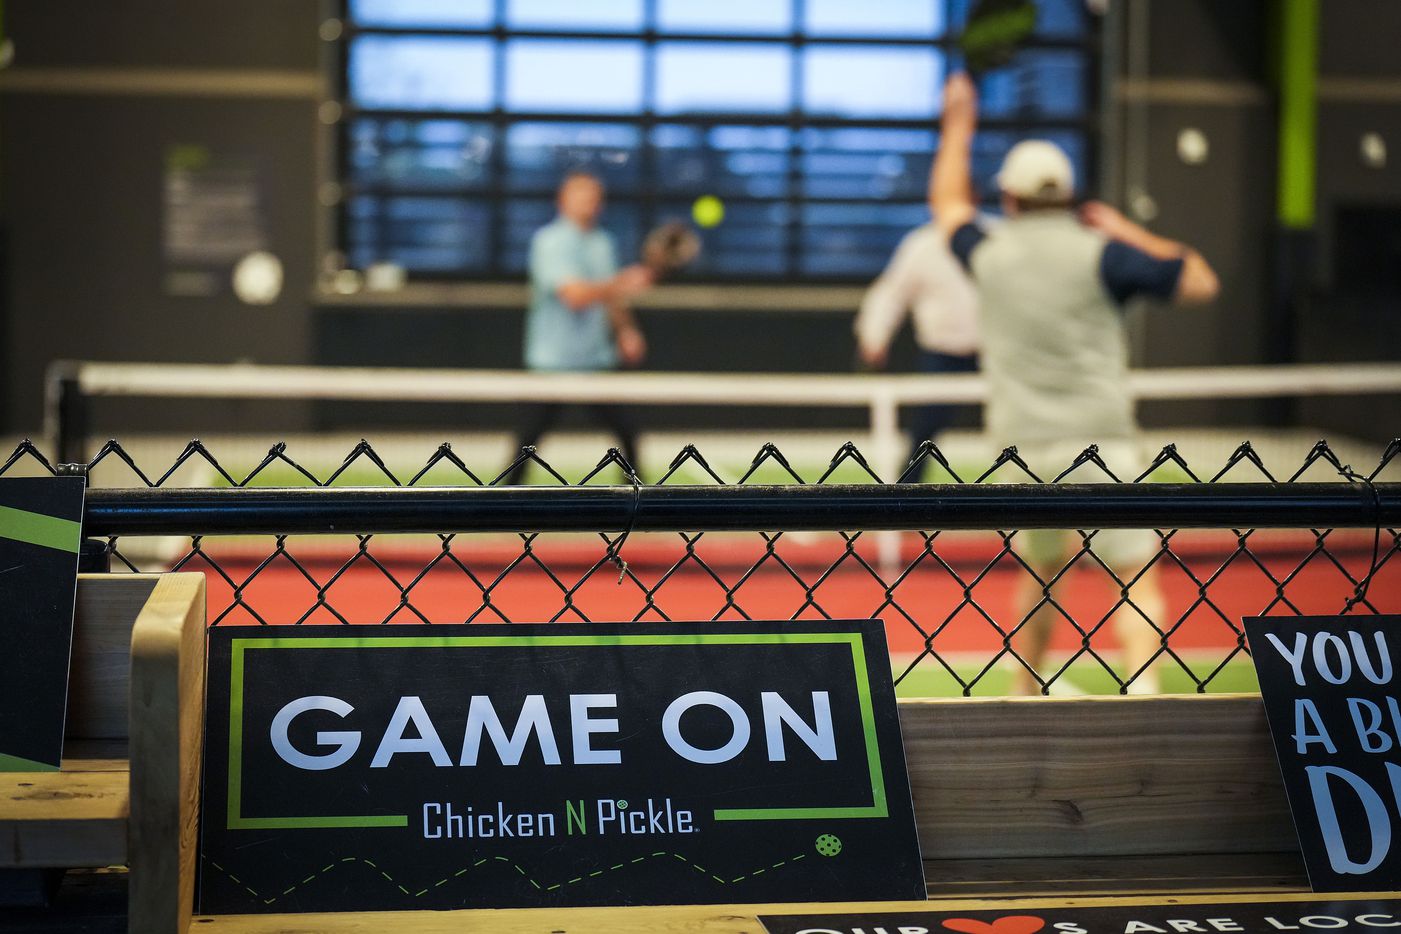 Patrons play pickleball at Chicken N Pickle on Friday, Dec. 9, 2022, in Grand Prairie.